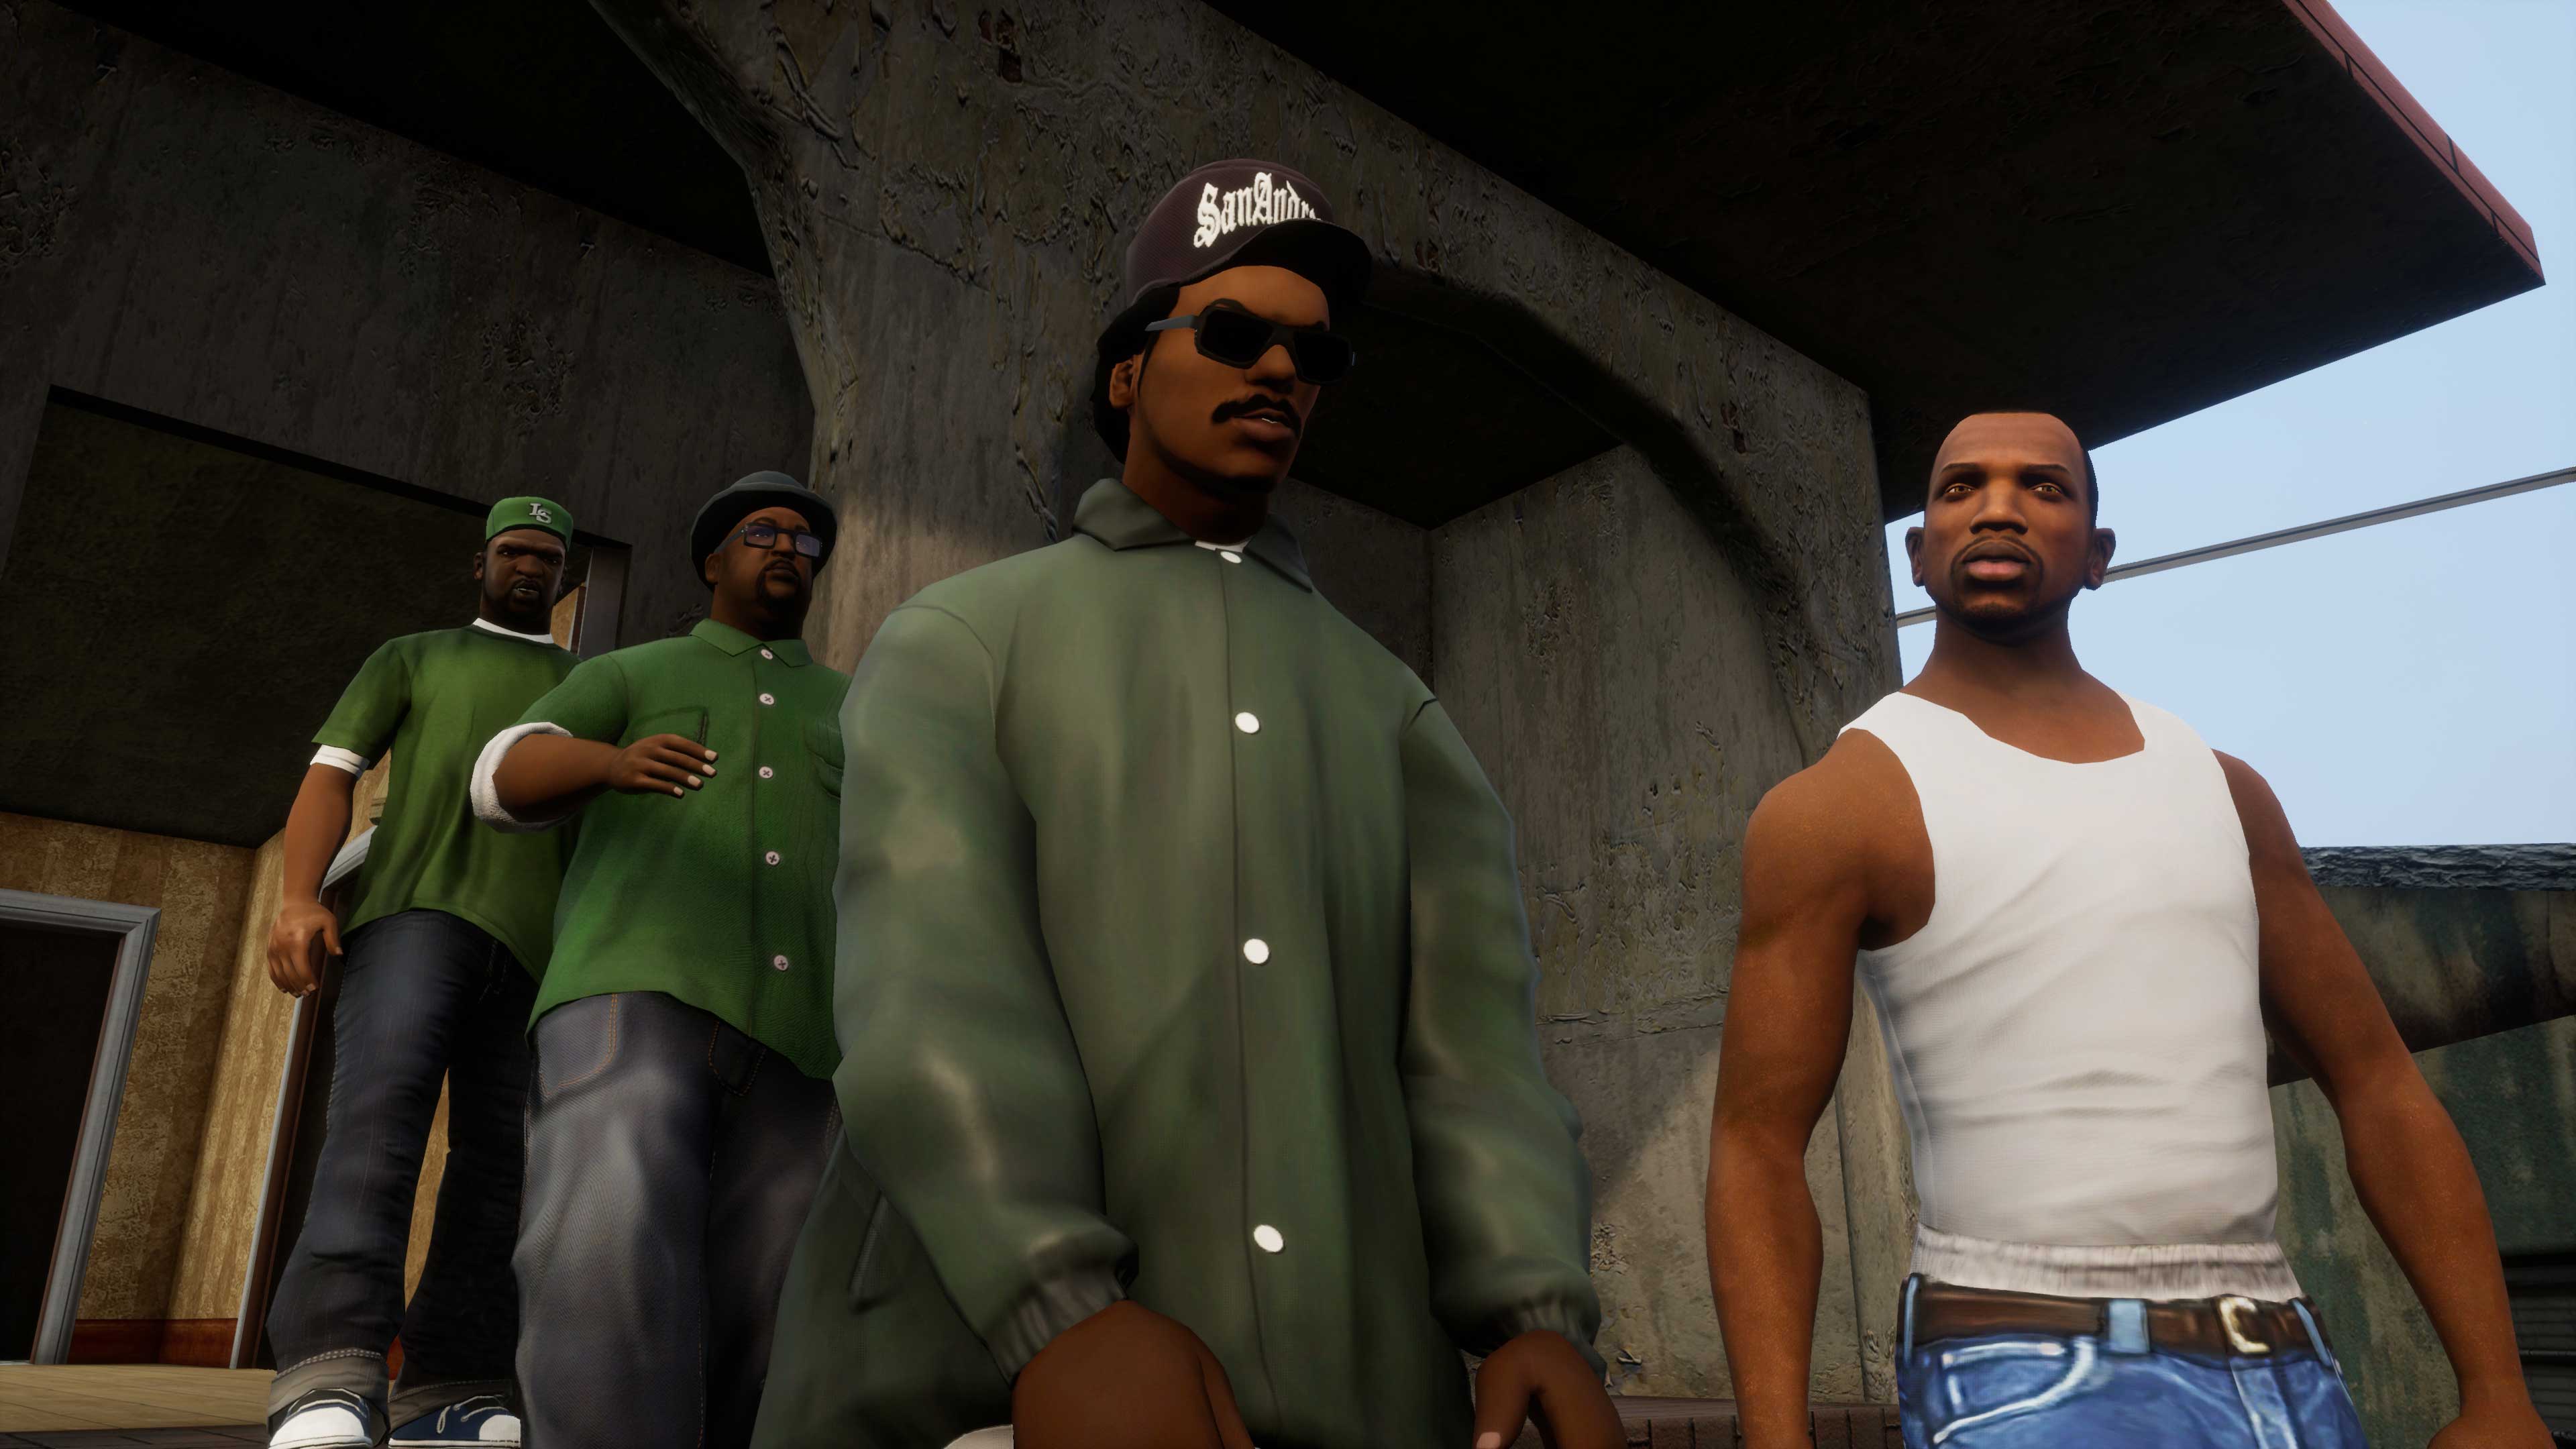 Rockstar Games on X: Bringing the classic worlds of Liberty City, Vice City,  and San Andreas to modern platforms, Grand Theft Auto: The Trilogy – The  Definitive Edition debuts new GTAV-inspired modern